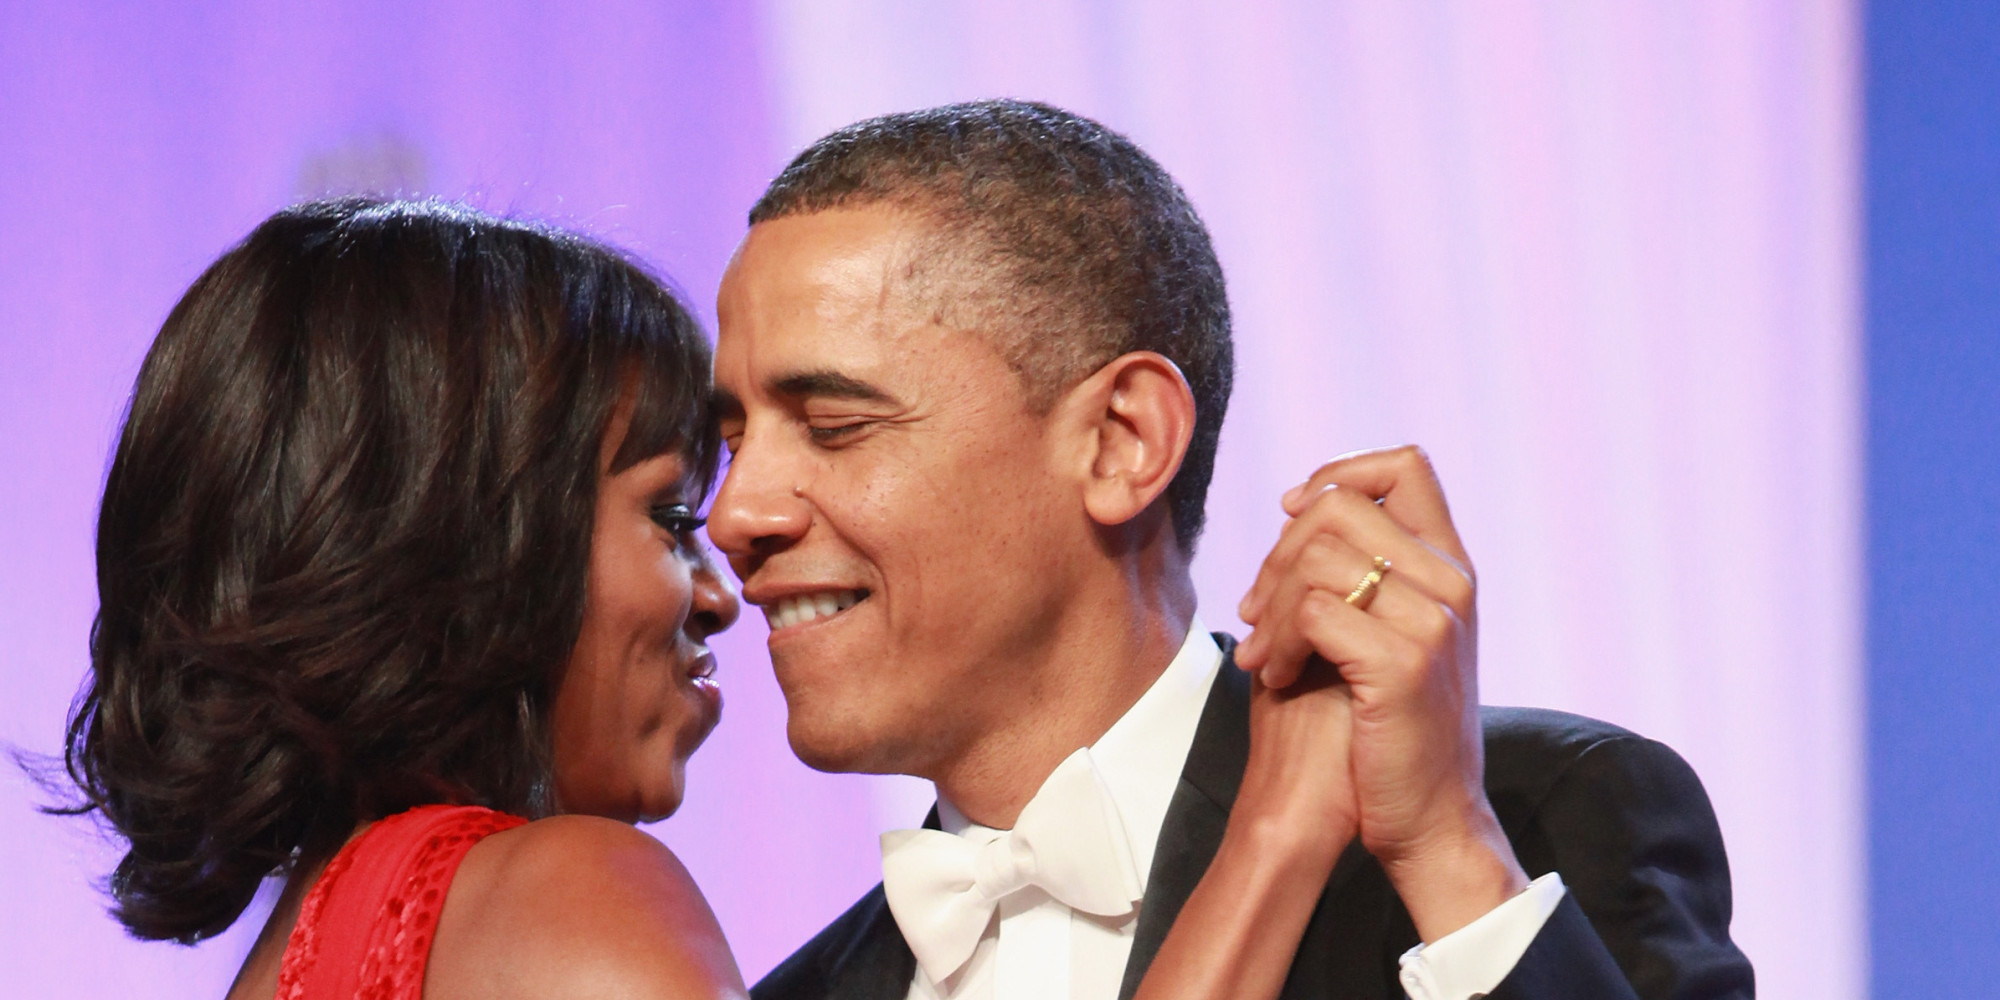 Barack And Michelle Obama's Love Story Is Getting The Hollywood Treatment | HuffPost2000 x 1000